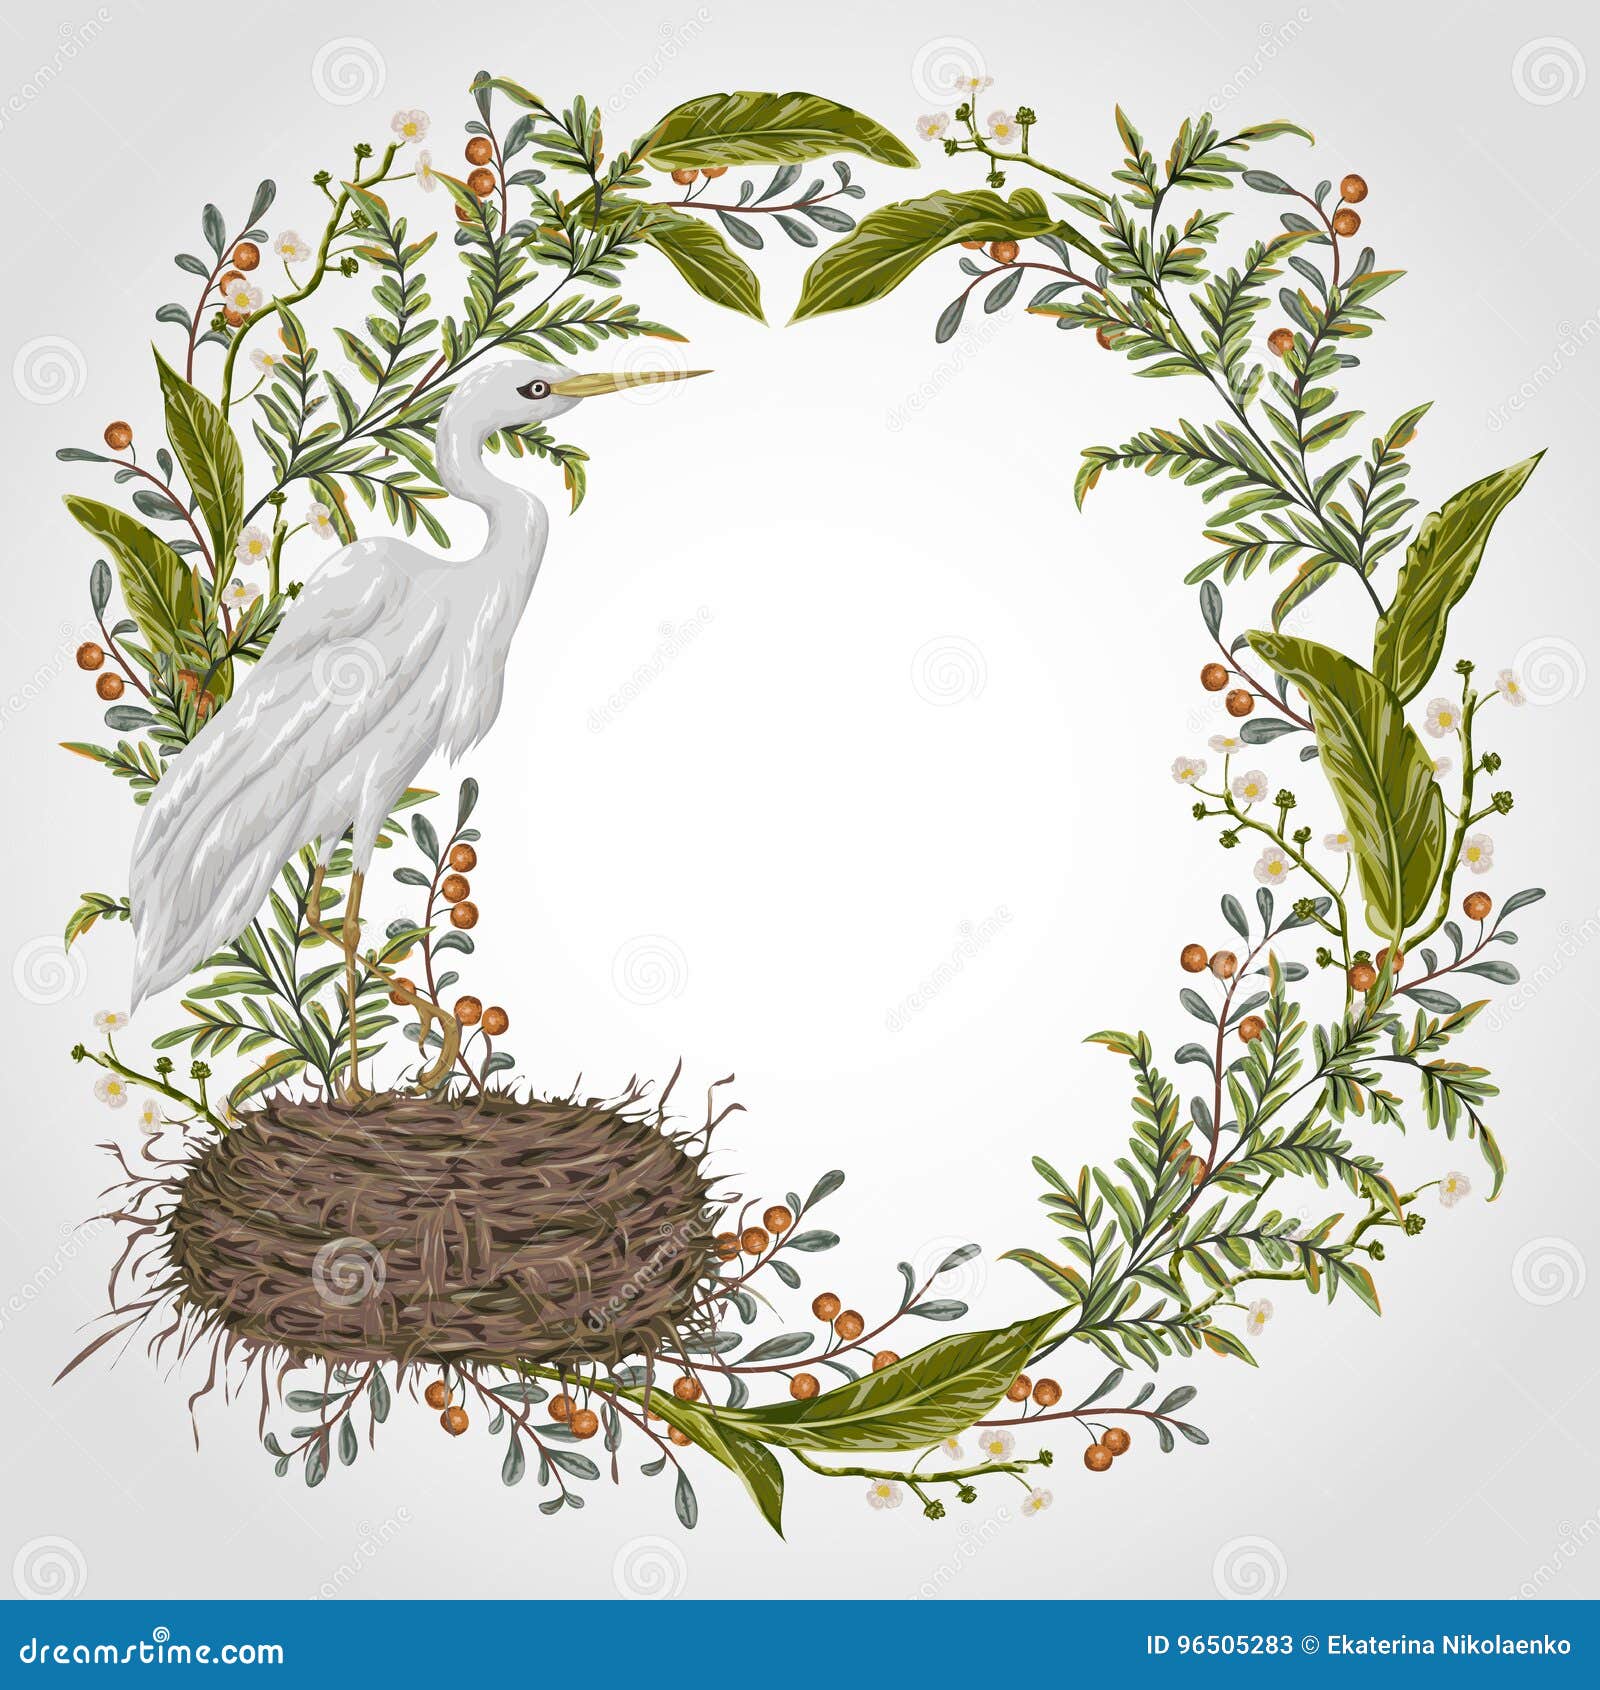 wreath with heron bird, nest and swamp plants. marsh flora and fauna.